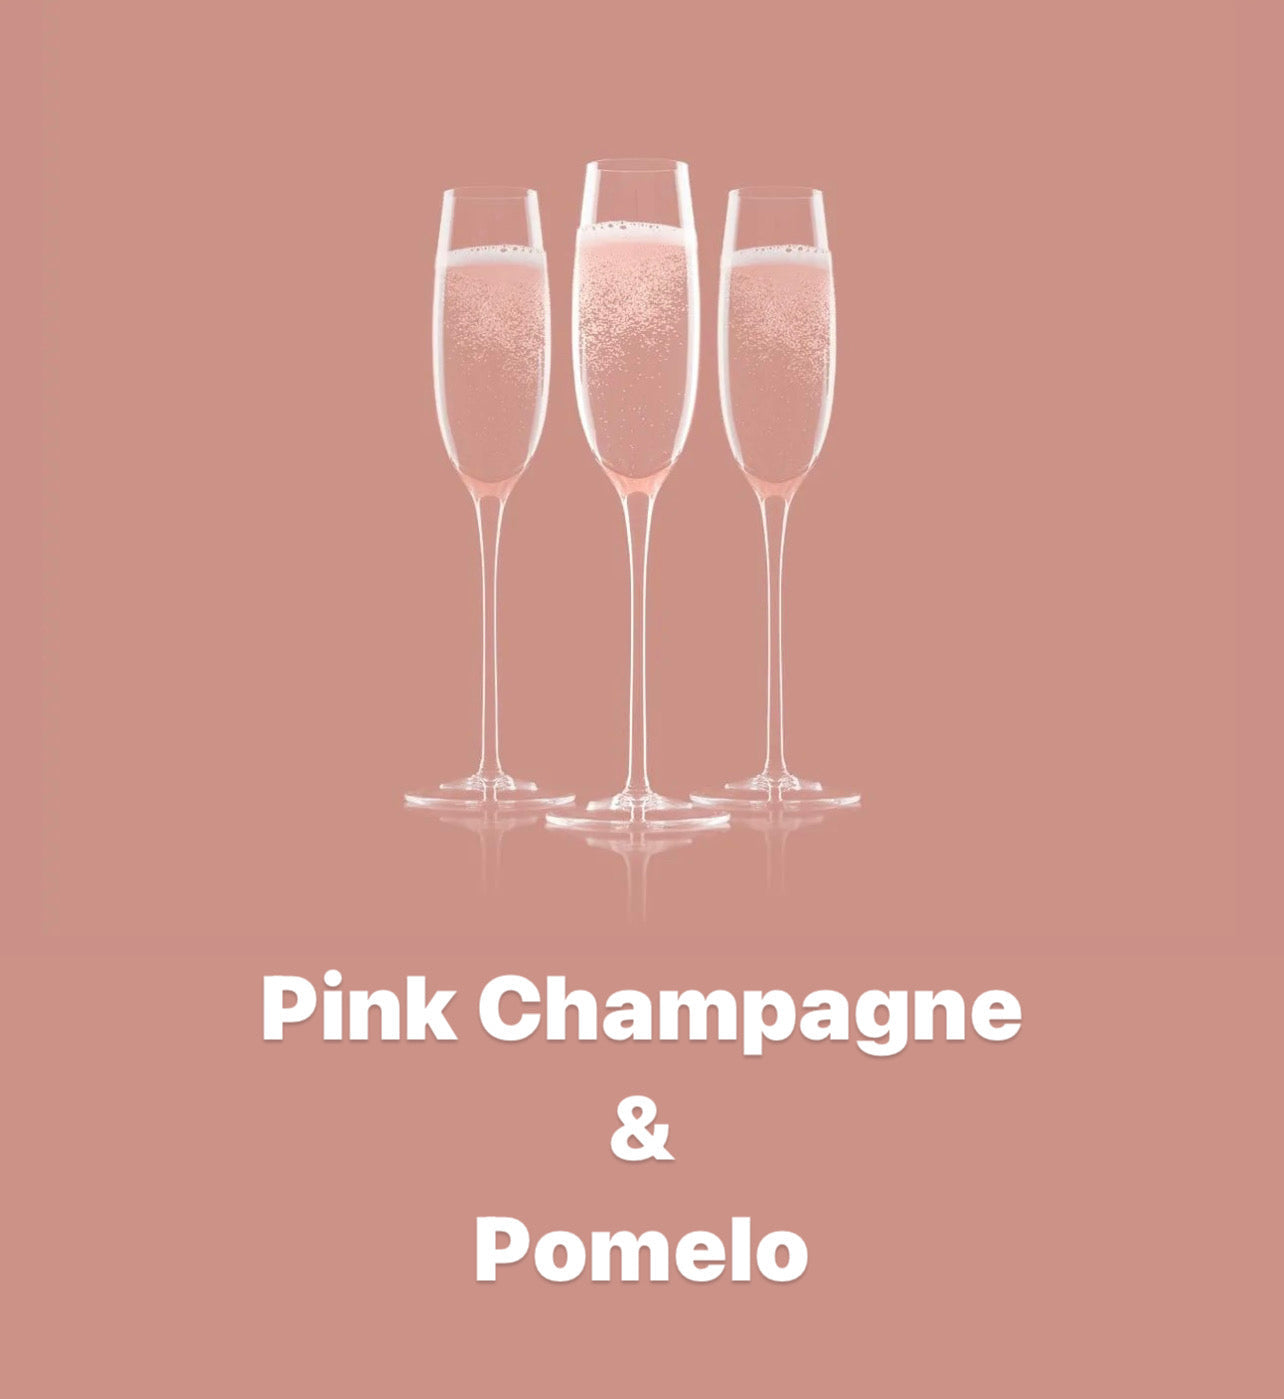 Pink Champagne & Pomelo 50g Snap Bar